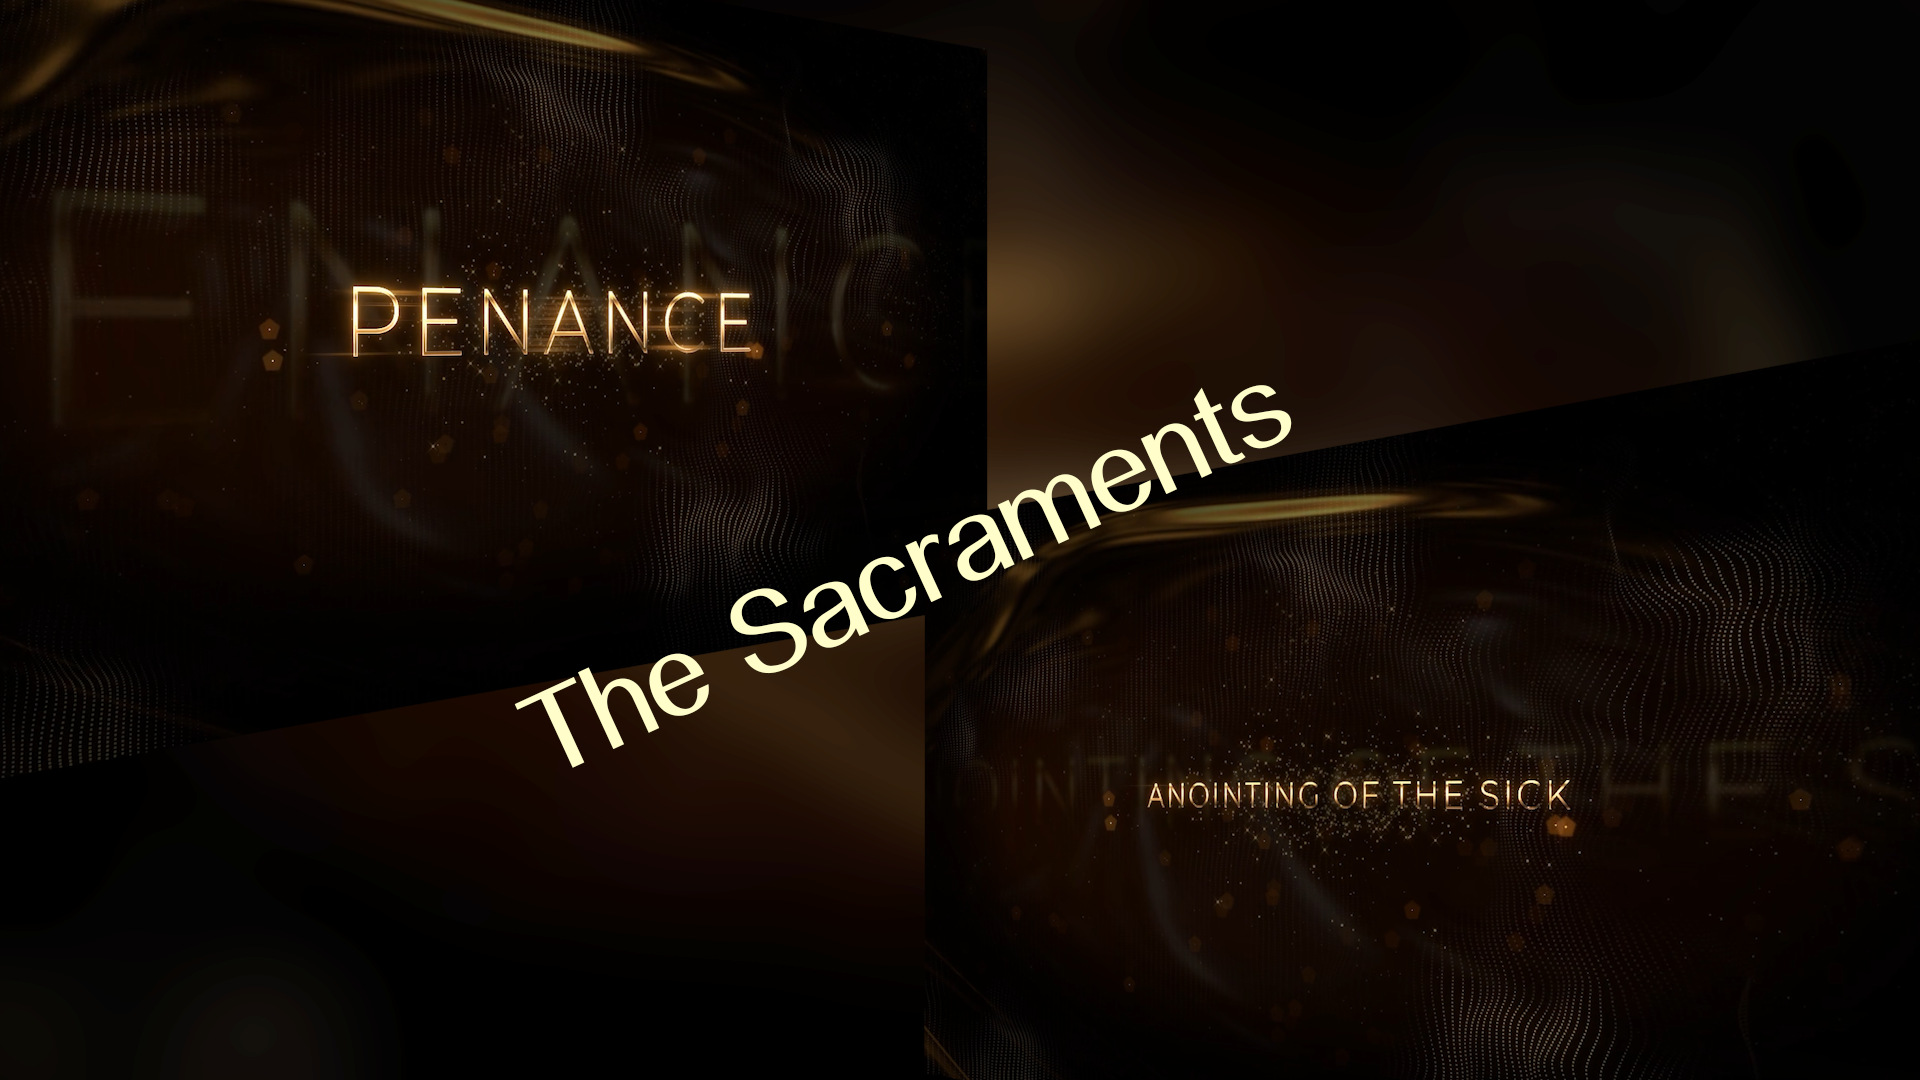 The Sacraments - Penance & Annointing